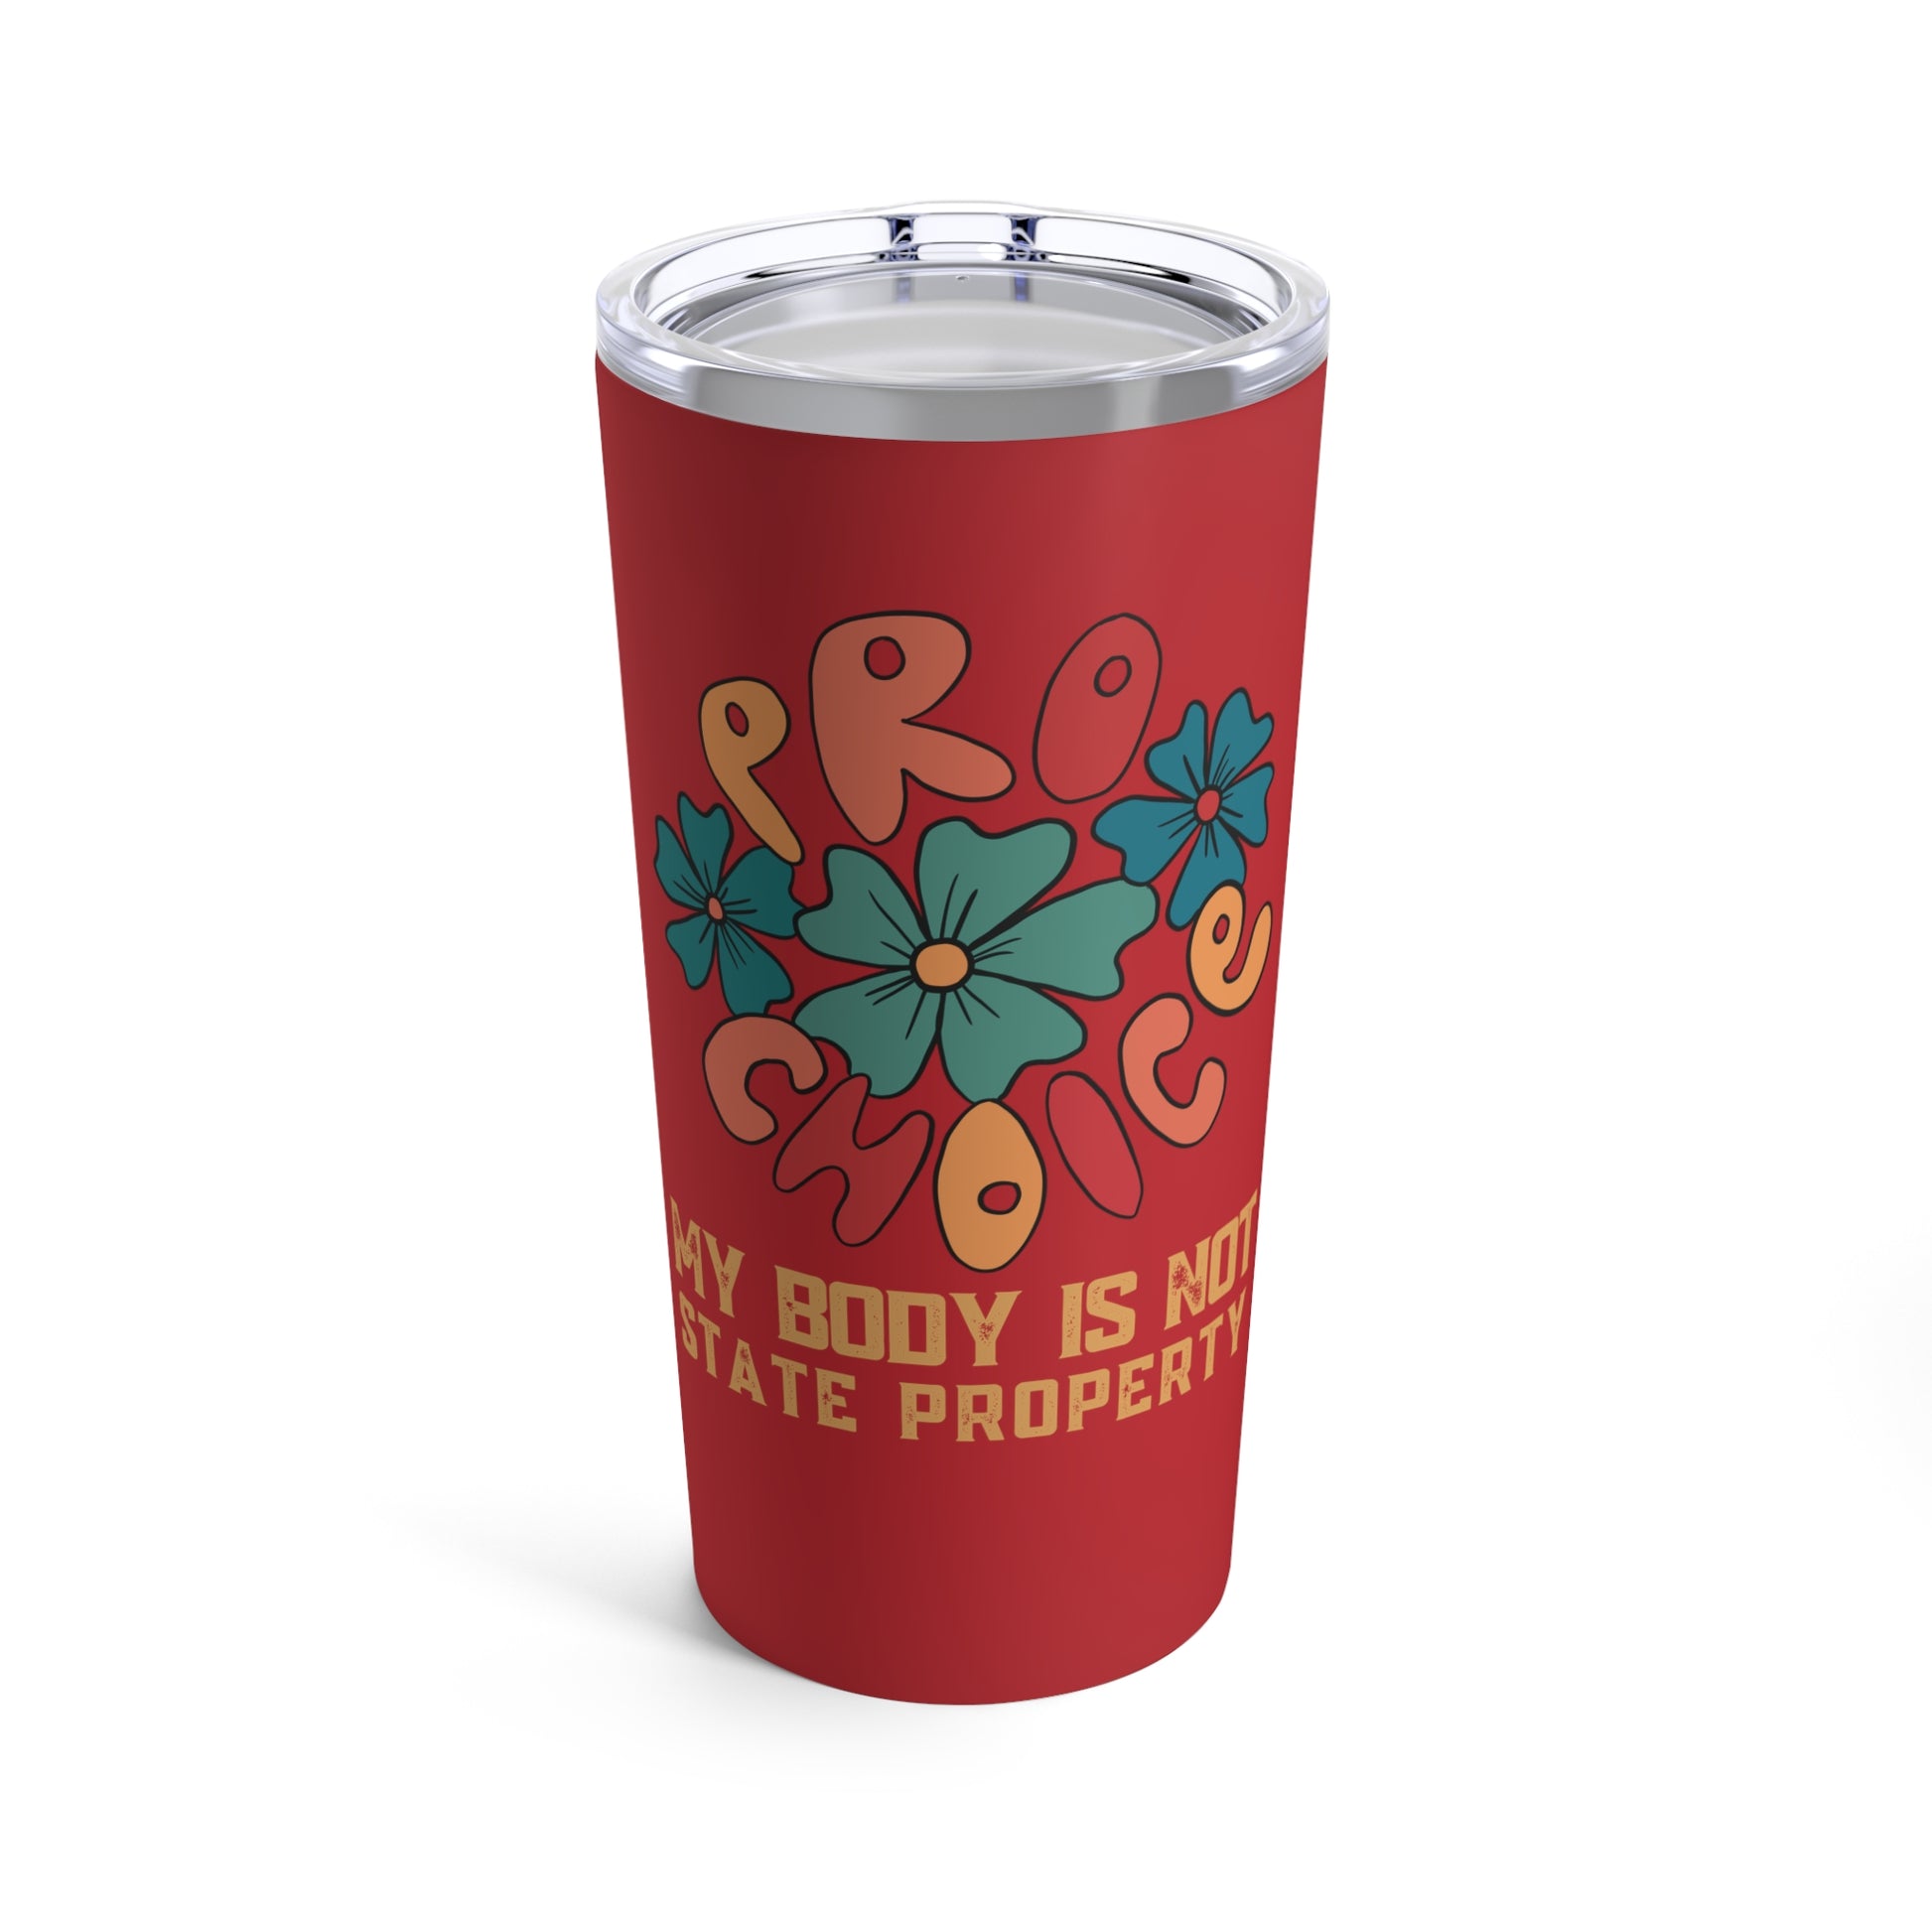 As a perfect gift for a feminist/activist friend, continue the fight for bodily autonomy with this red 20 ounce Pro-choice tumbler